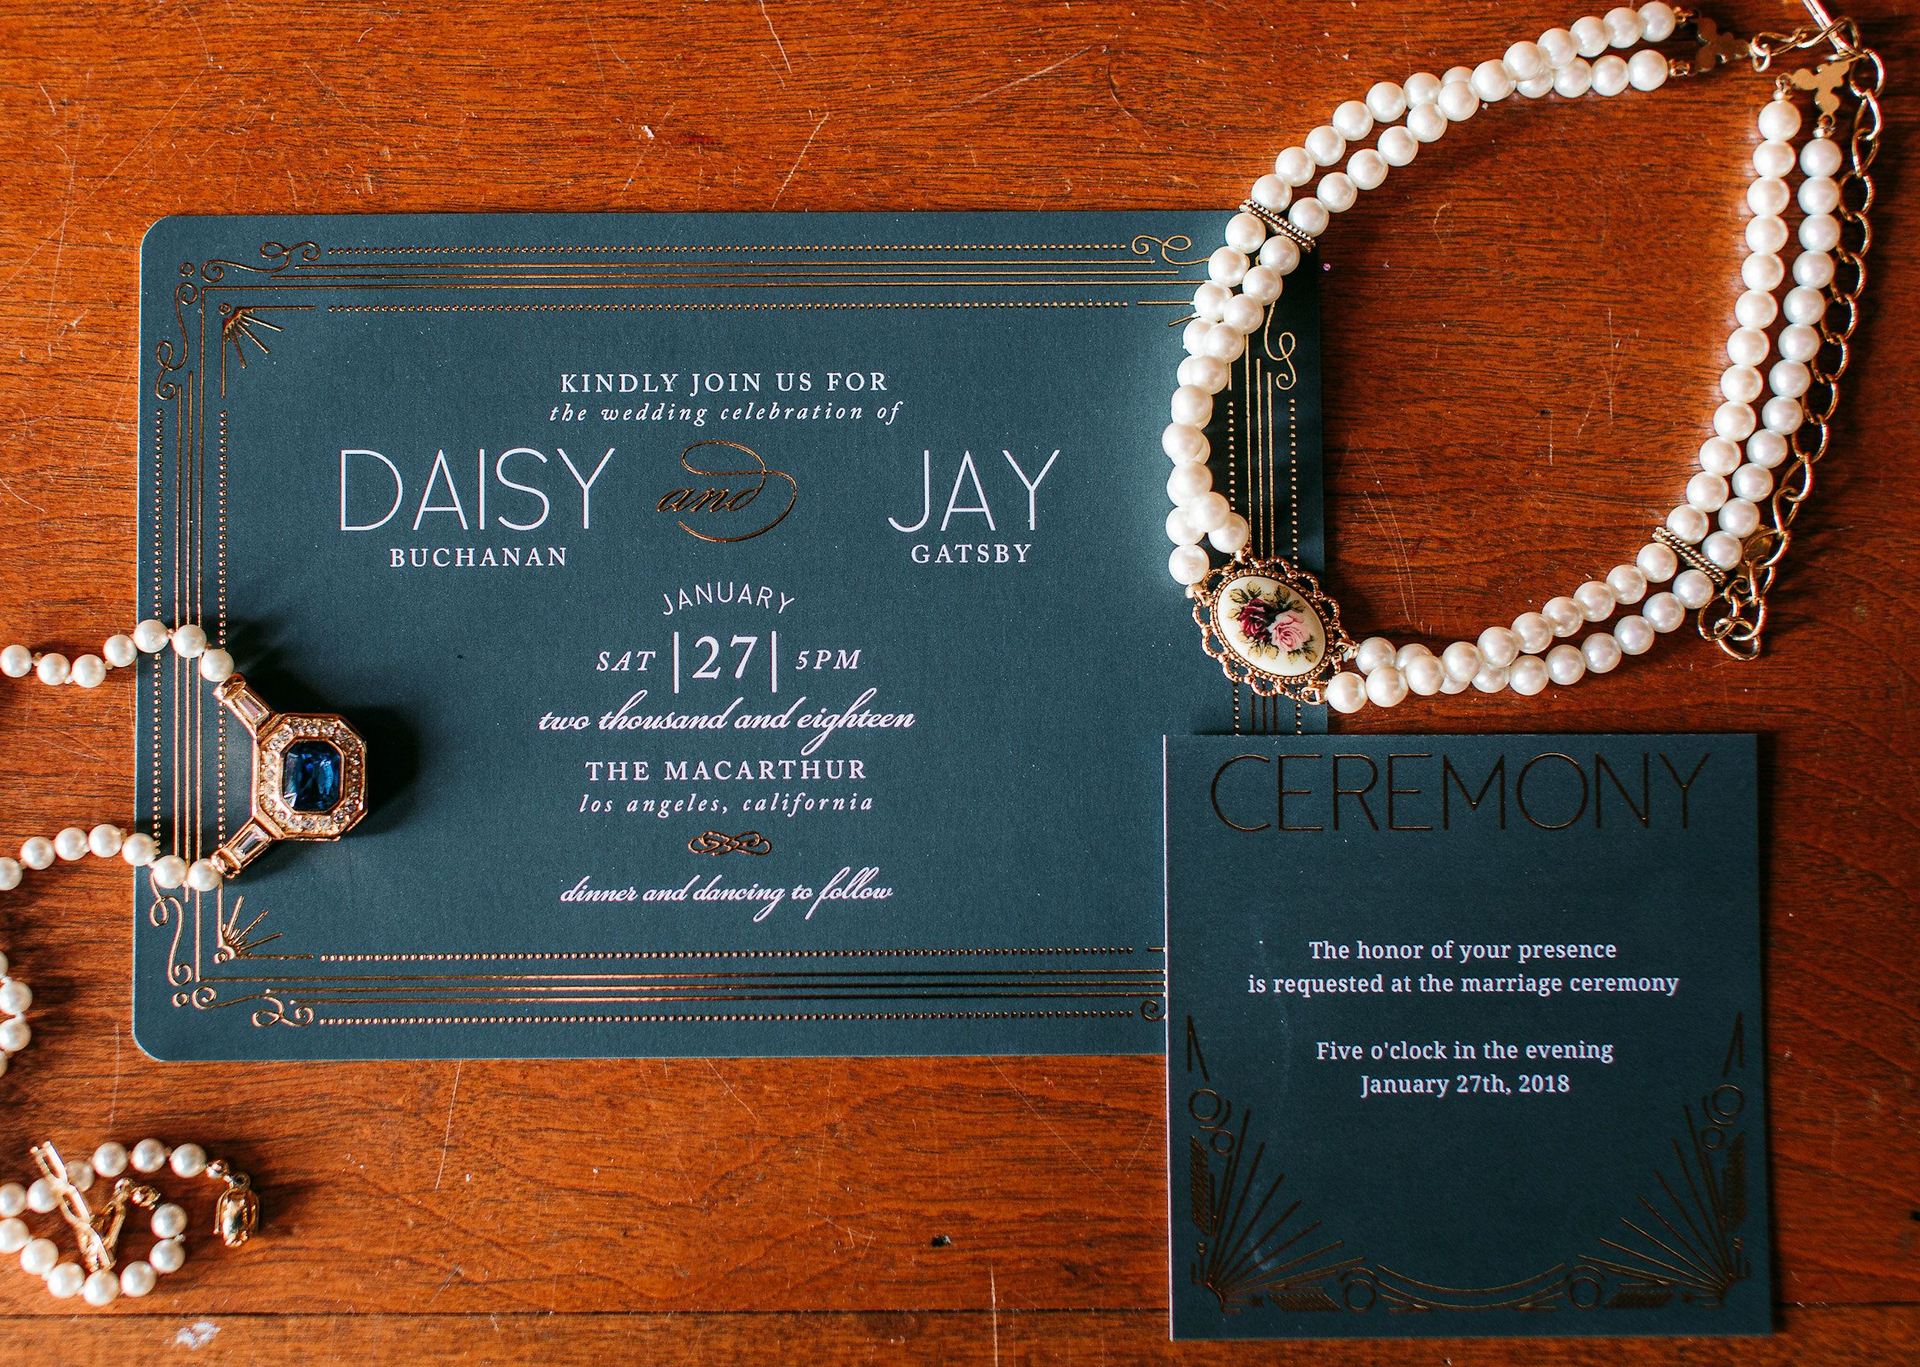 Navy wedding invitation surrounded by pearls laid upon wooden table